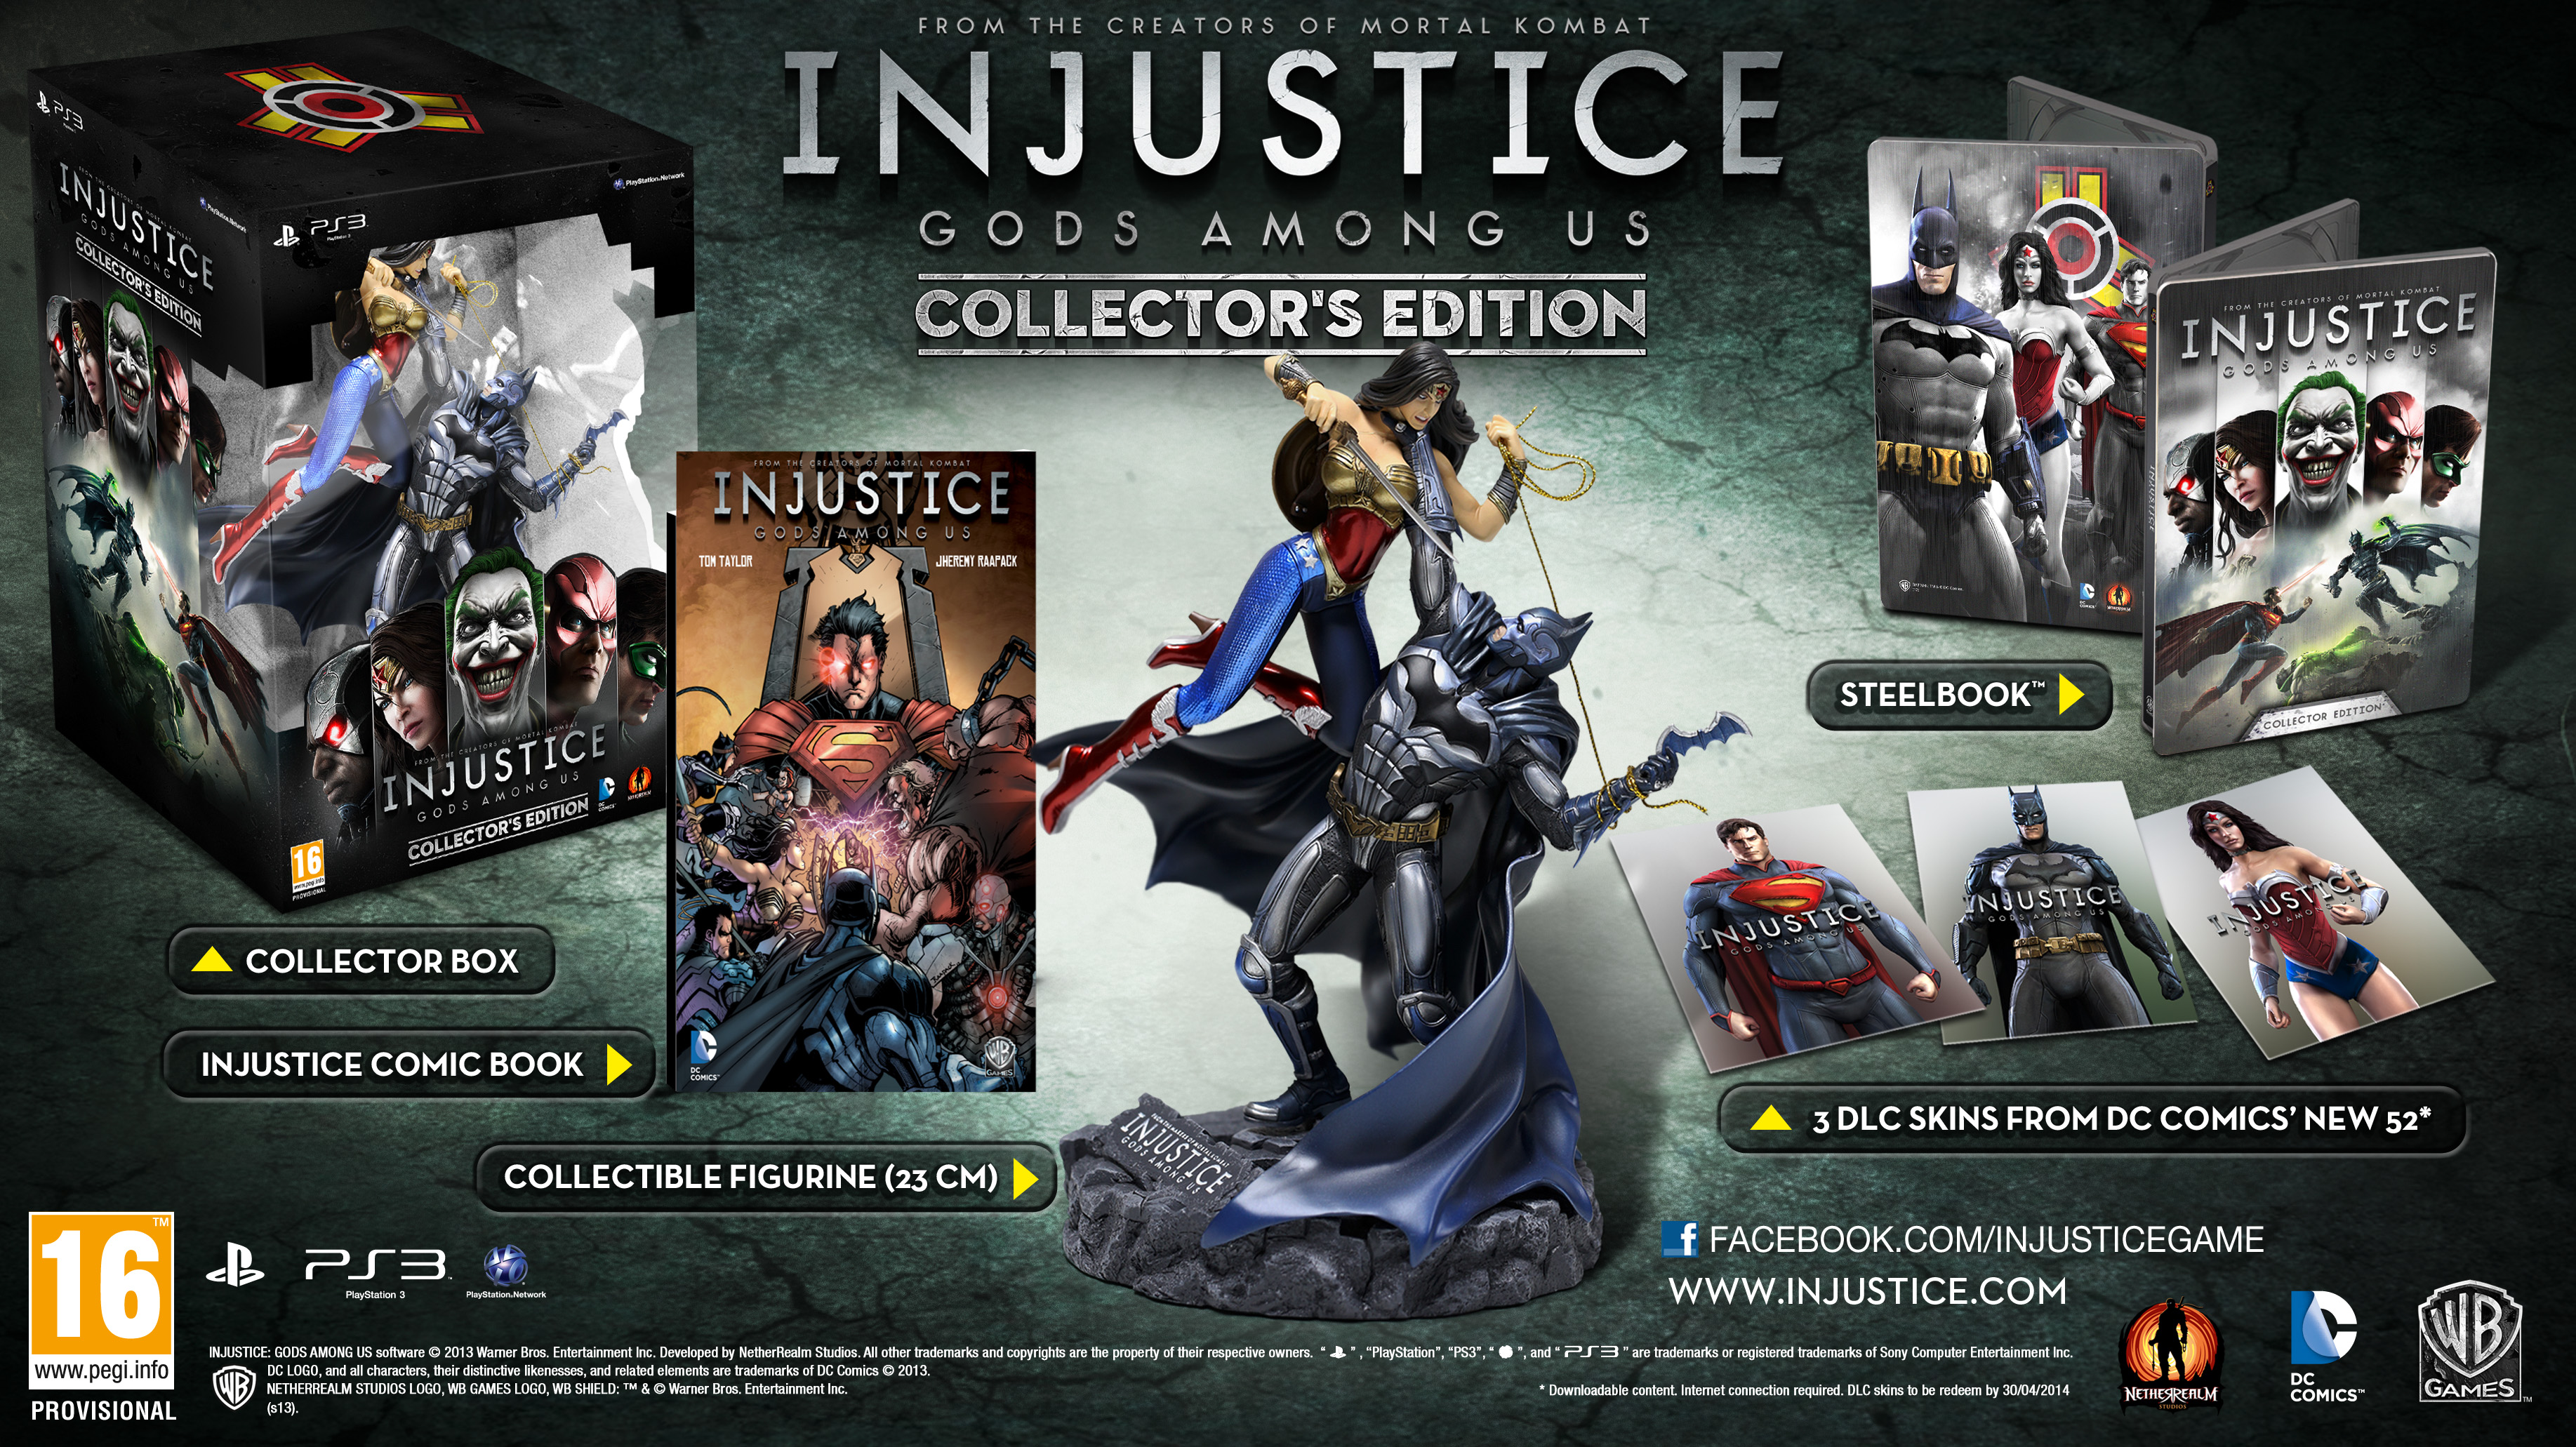 Injustice Gods Among Us - collector's edition